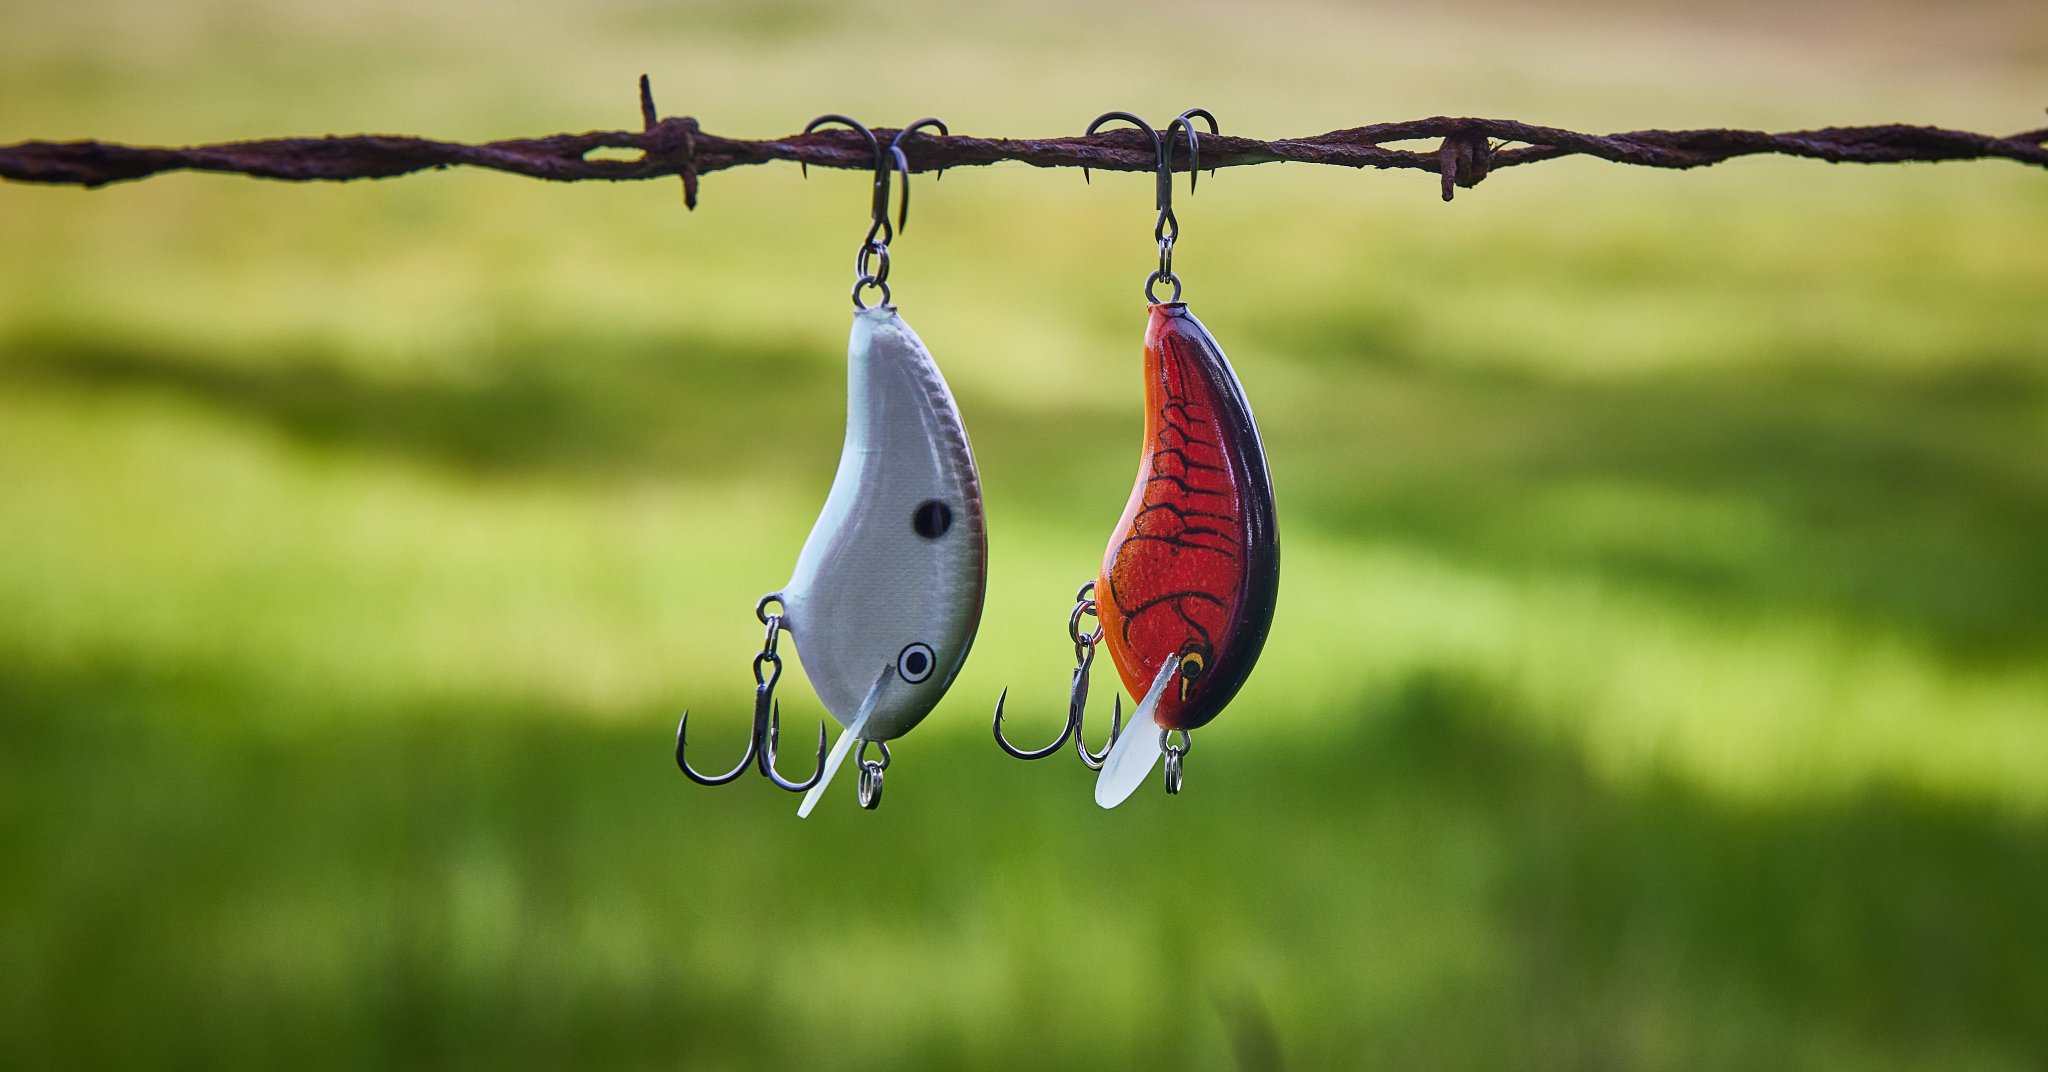 Tackle Warehouse on X: 🔥DAILY SPECIAL🔥 Shop Now 👉   25% - 34% Off Rapala Ott's Garage OG Tiny 4  Crankbaits Now: $6.58 - $7.49, Save: $2.50 - $3.41